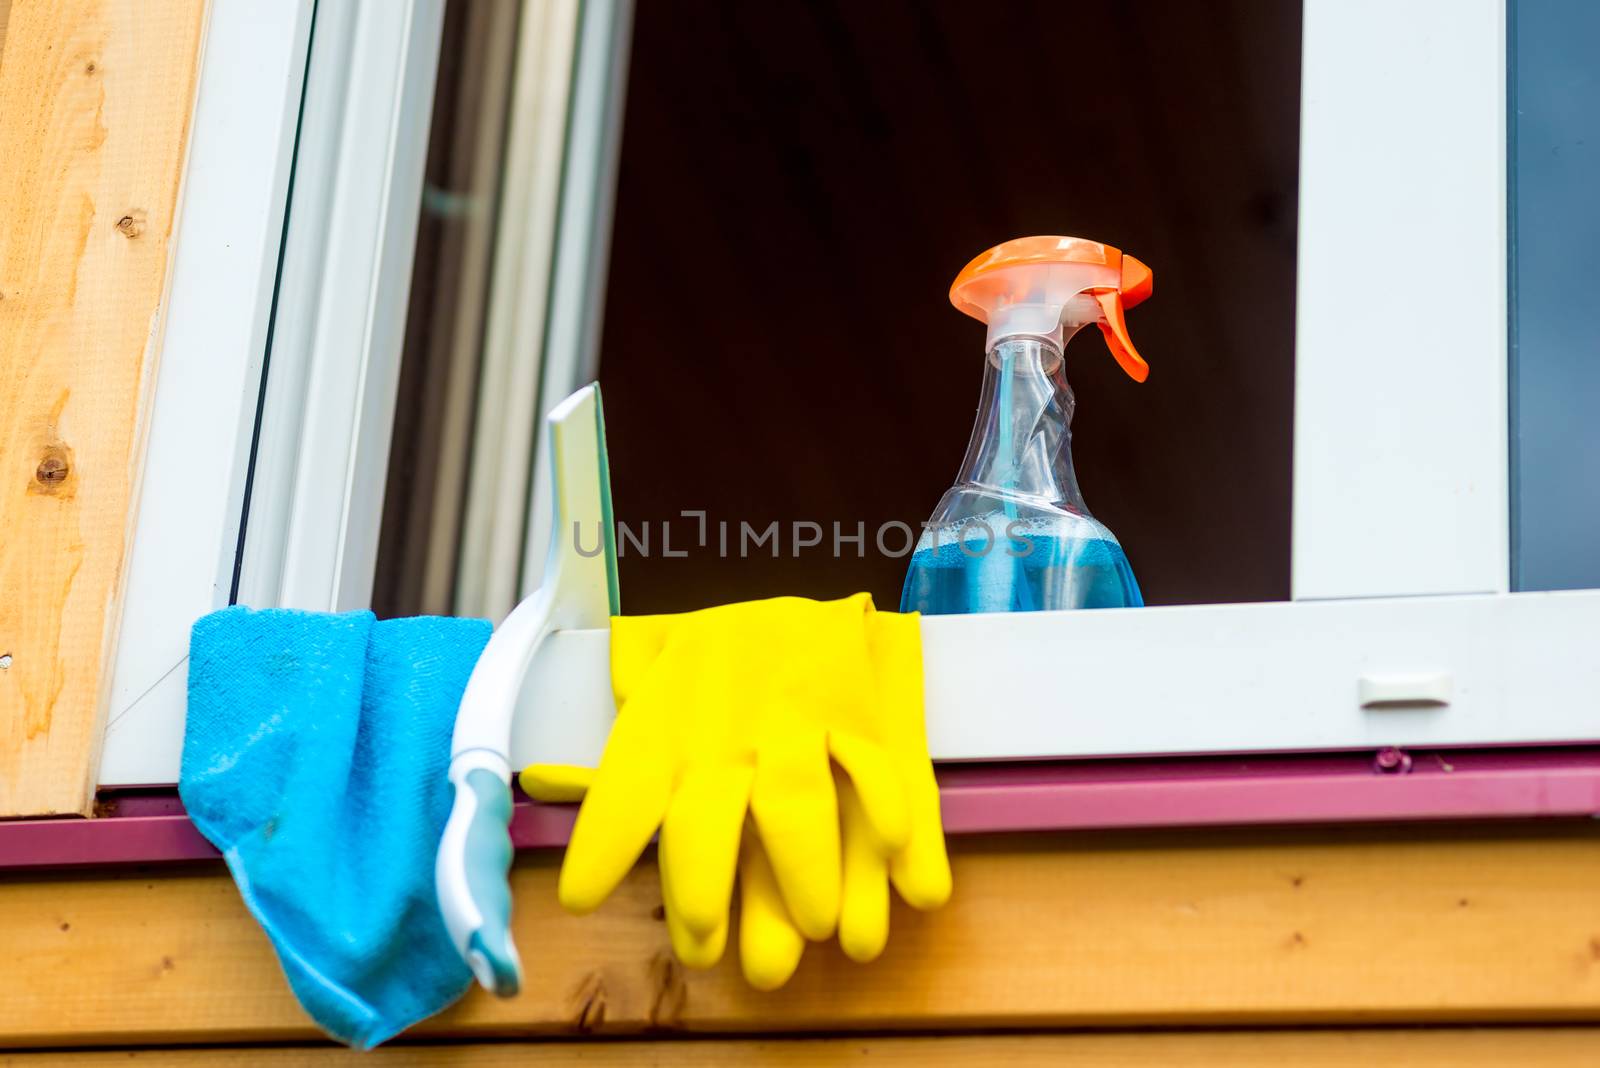 window cleaning tools on window sill close up